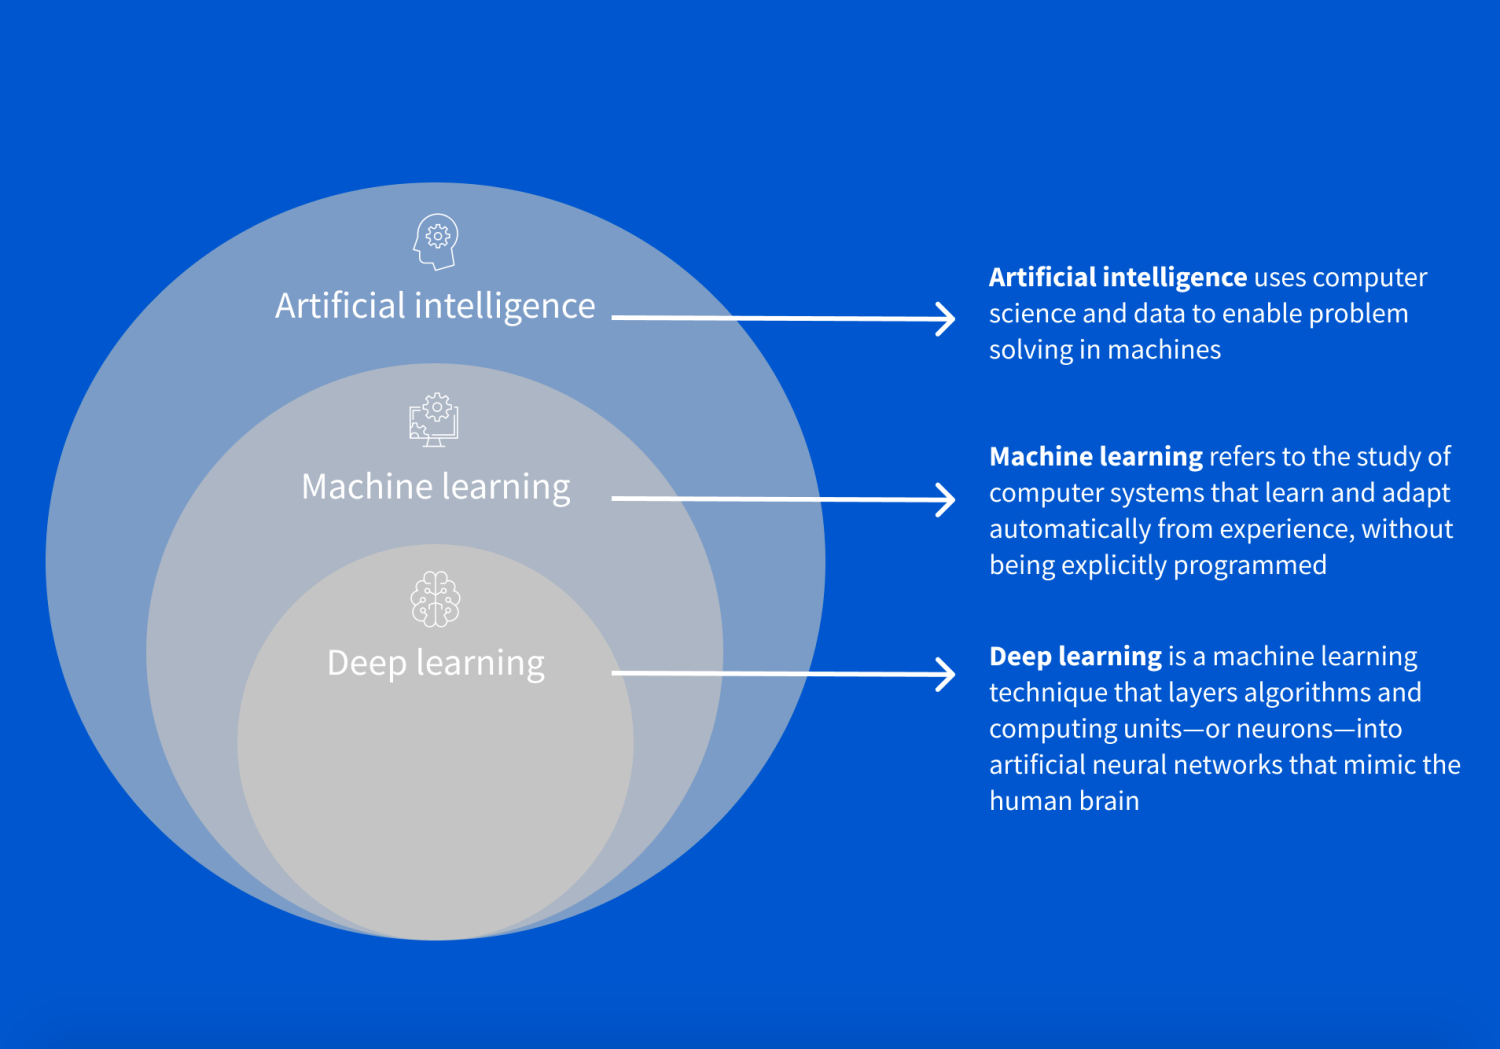 [Diagram] A venn diagram on a blue background showing how deep learning, machine learning, and AI are nested.